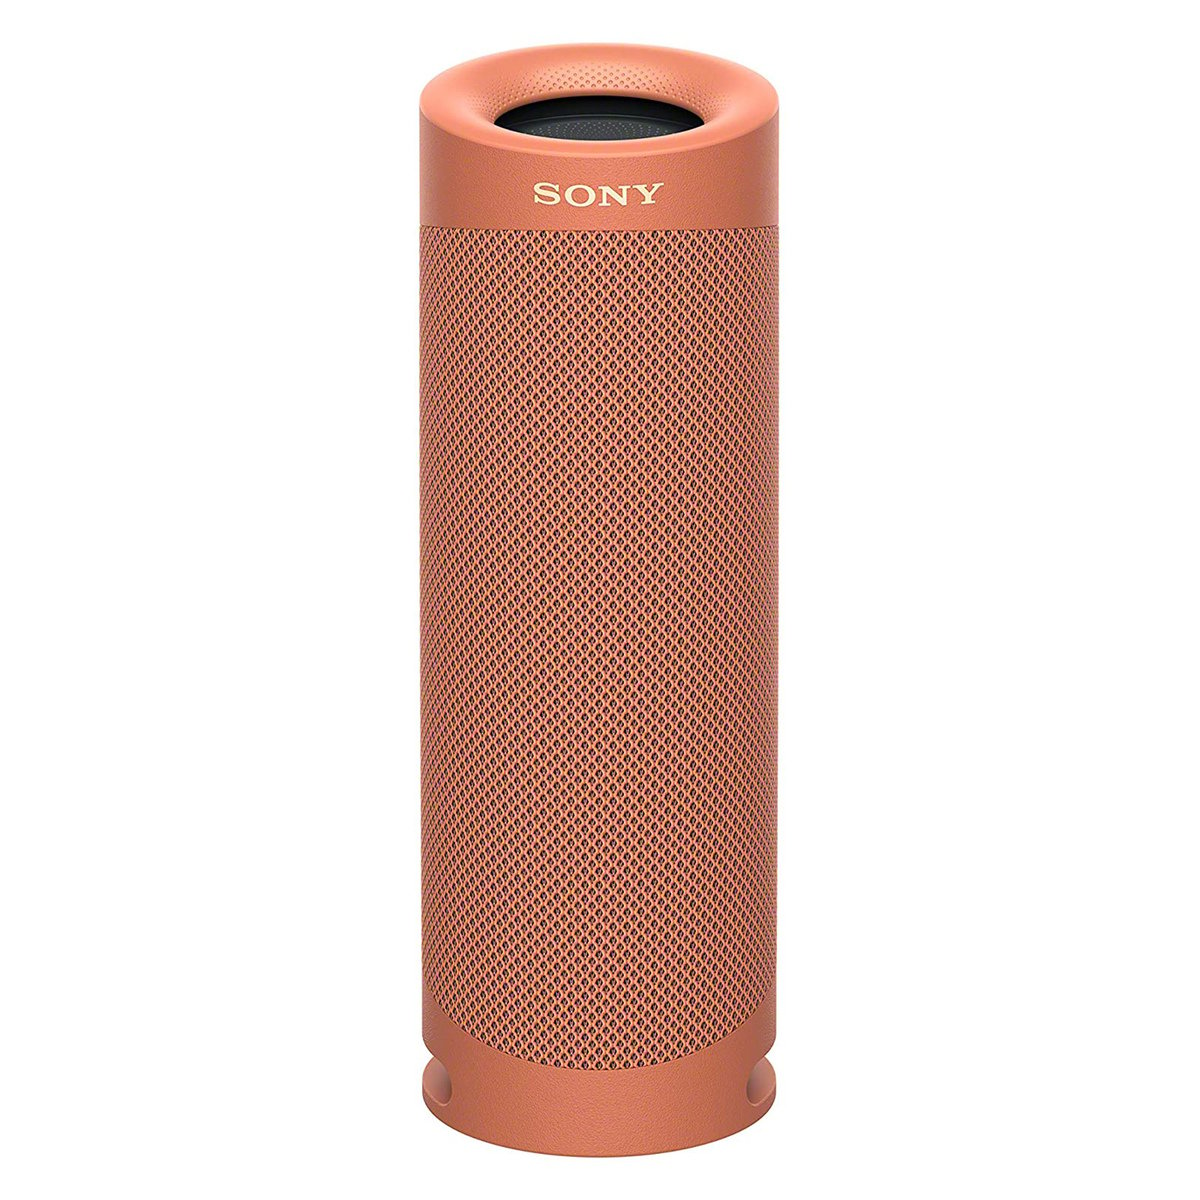 Sony SRS-XB23 EXTRA BASS Wireless Portable Speaker IP67 Waterproof Bluetooth and Built In Mic for Phone Calls, Coral Red